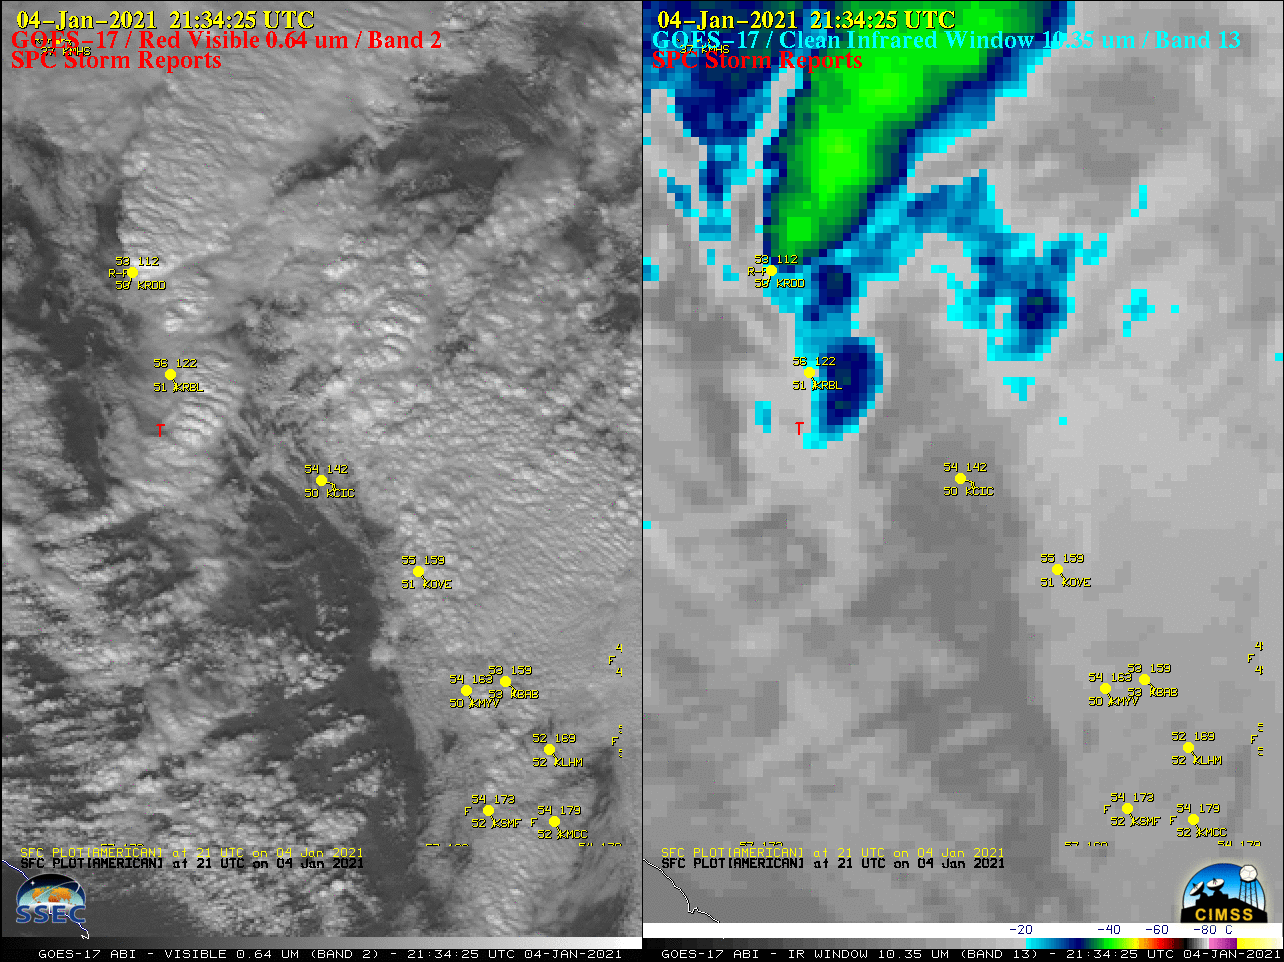 GOES-16 “Red” Visible (0.64 µm, left) and “Clean” Infrared Window (10.35 µm, right) images, with SPC Storm Reports plotted in red [click to play animation | MP4]